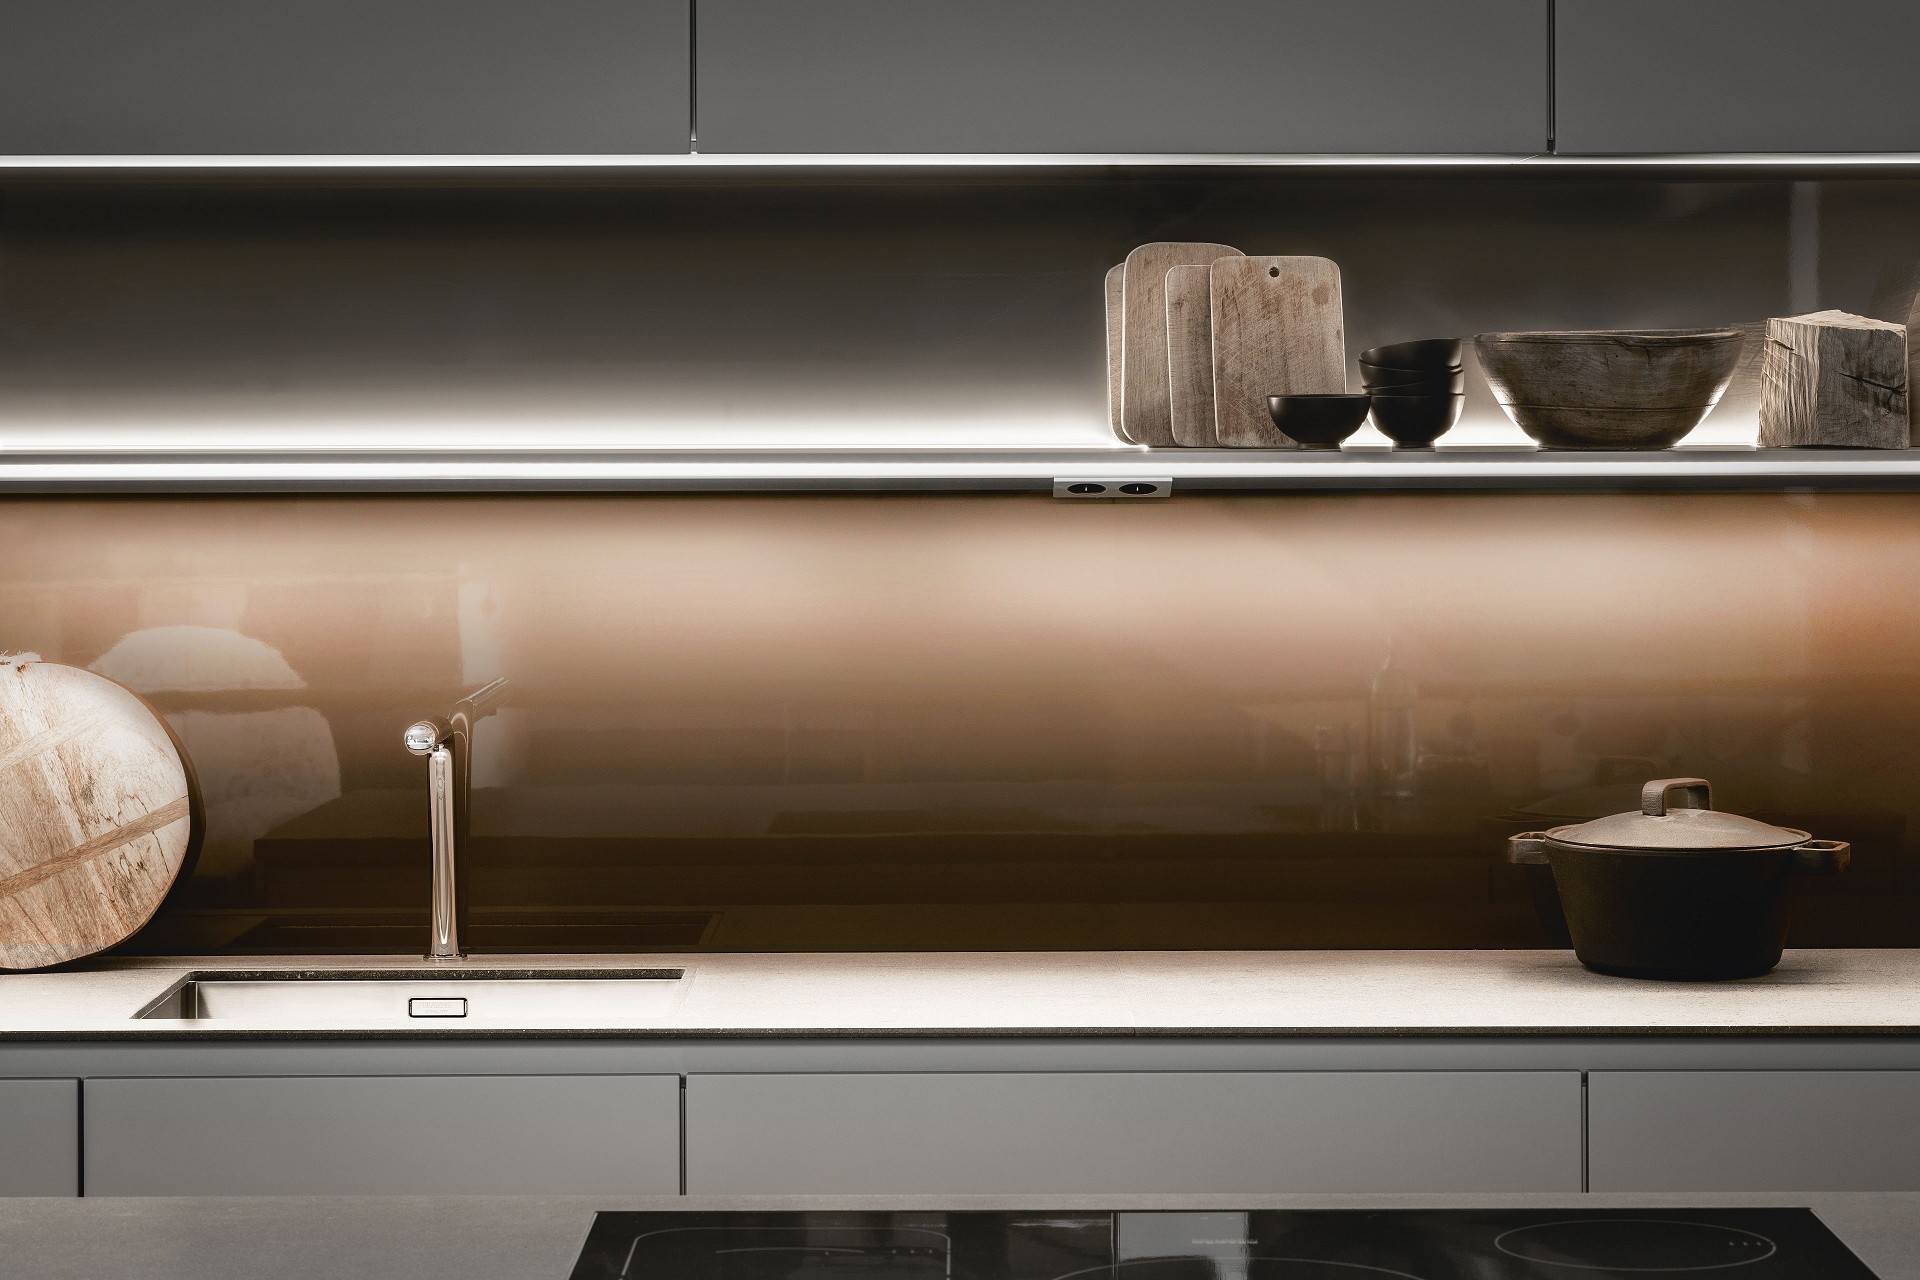 The SieMatic lighting rail offers, in addition to ideal task lighting, colorful mood lighting for the kitchen.